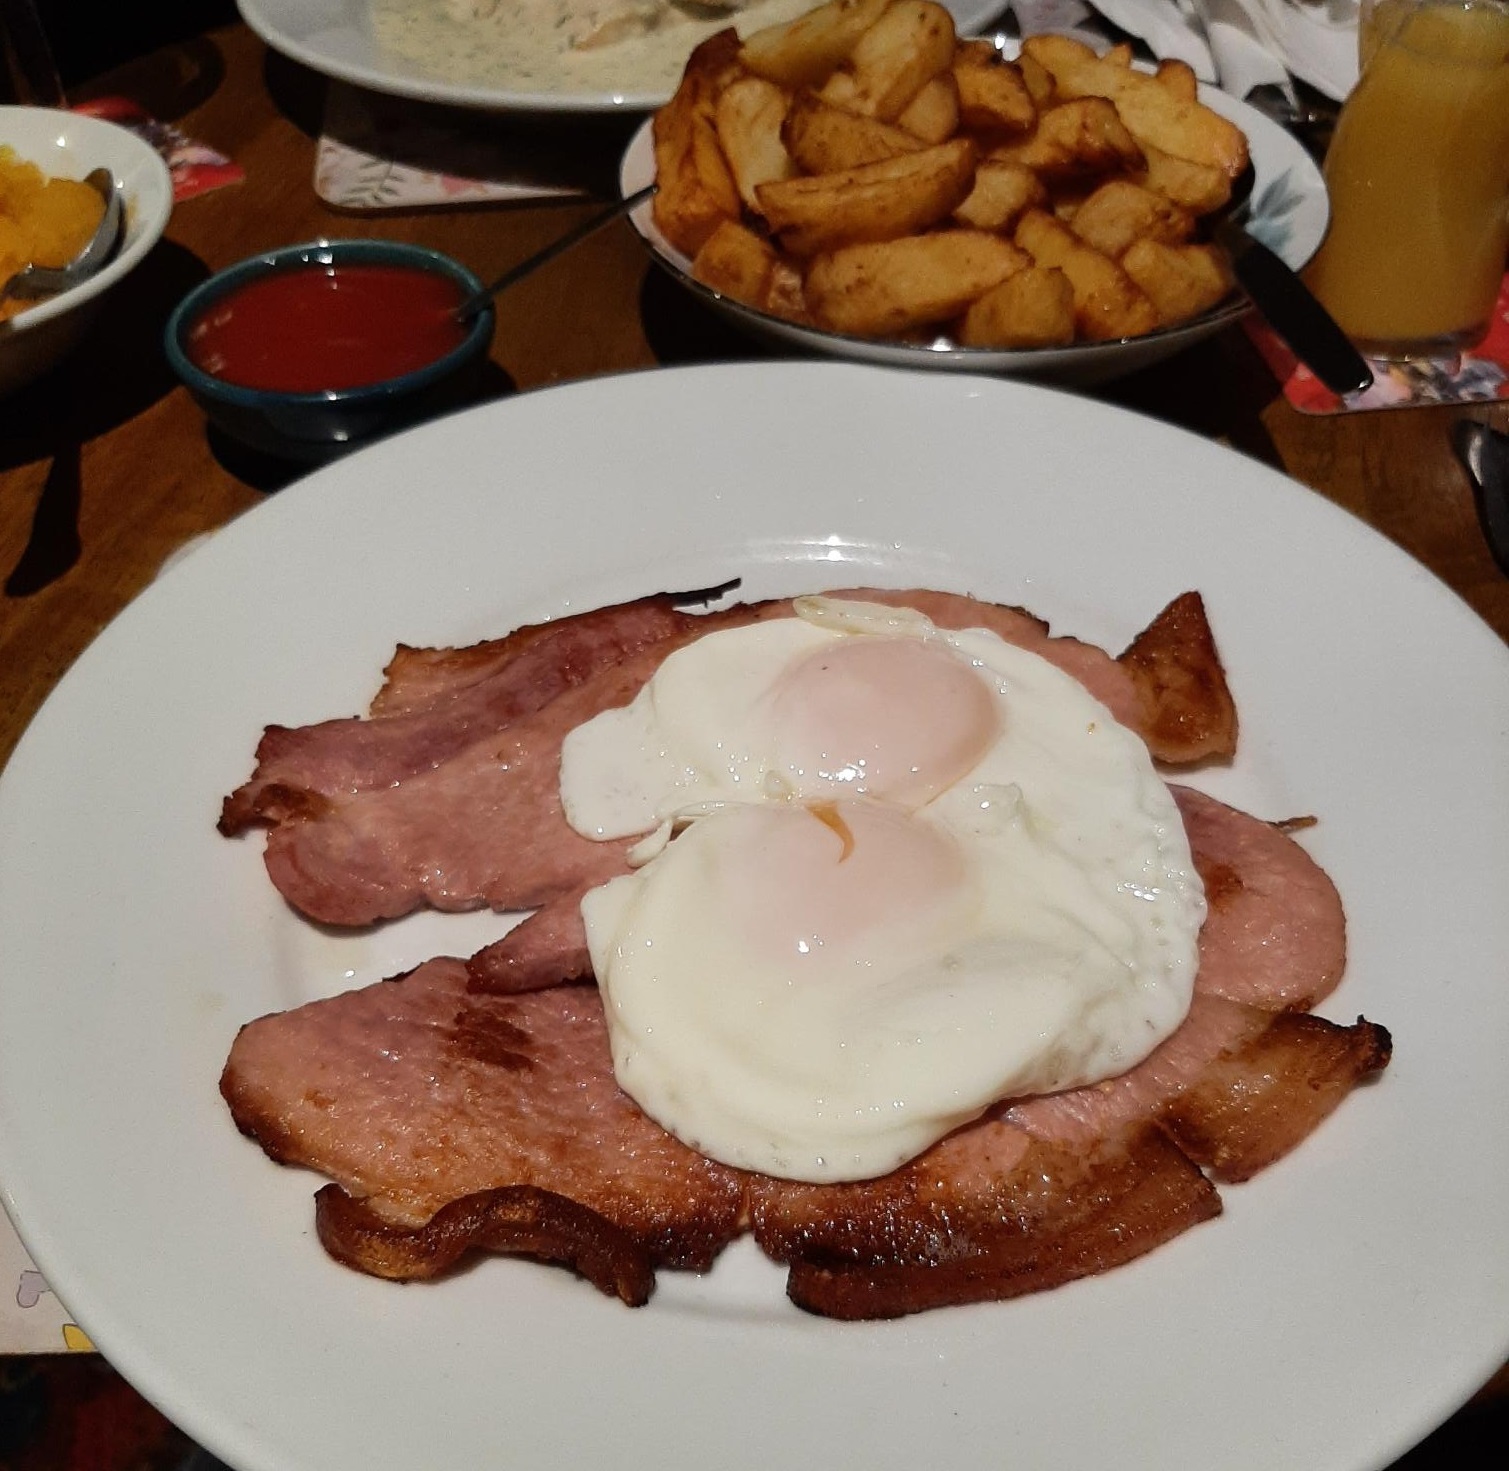 Gammon steak with two fried eggs - but the pineapple was declined